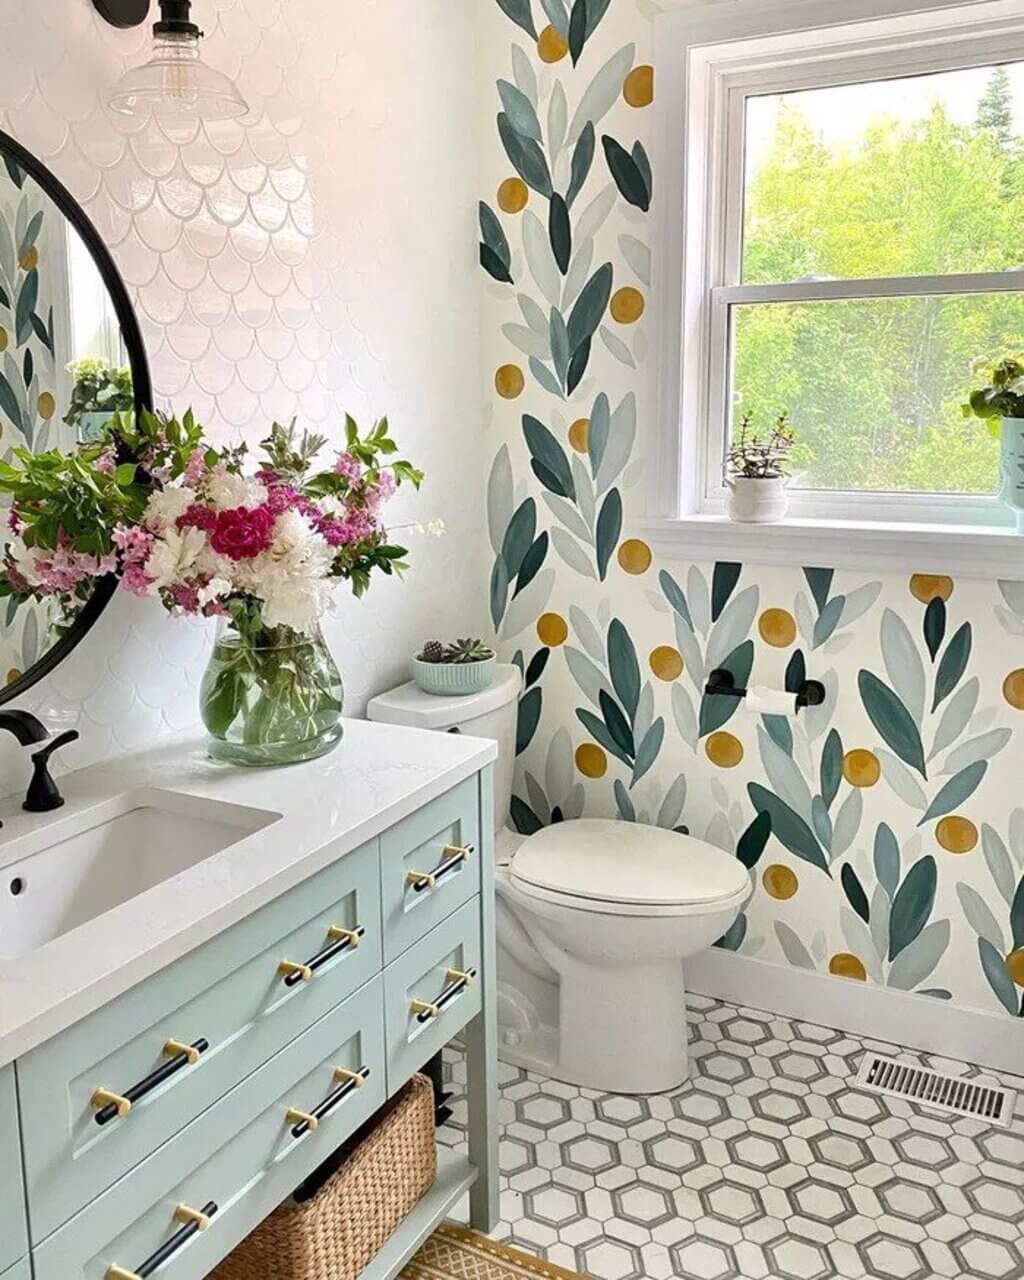  Mismatched Patterns for a Loud Personality for bathroom
